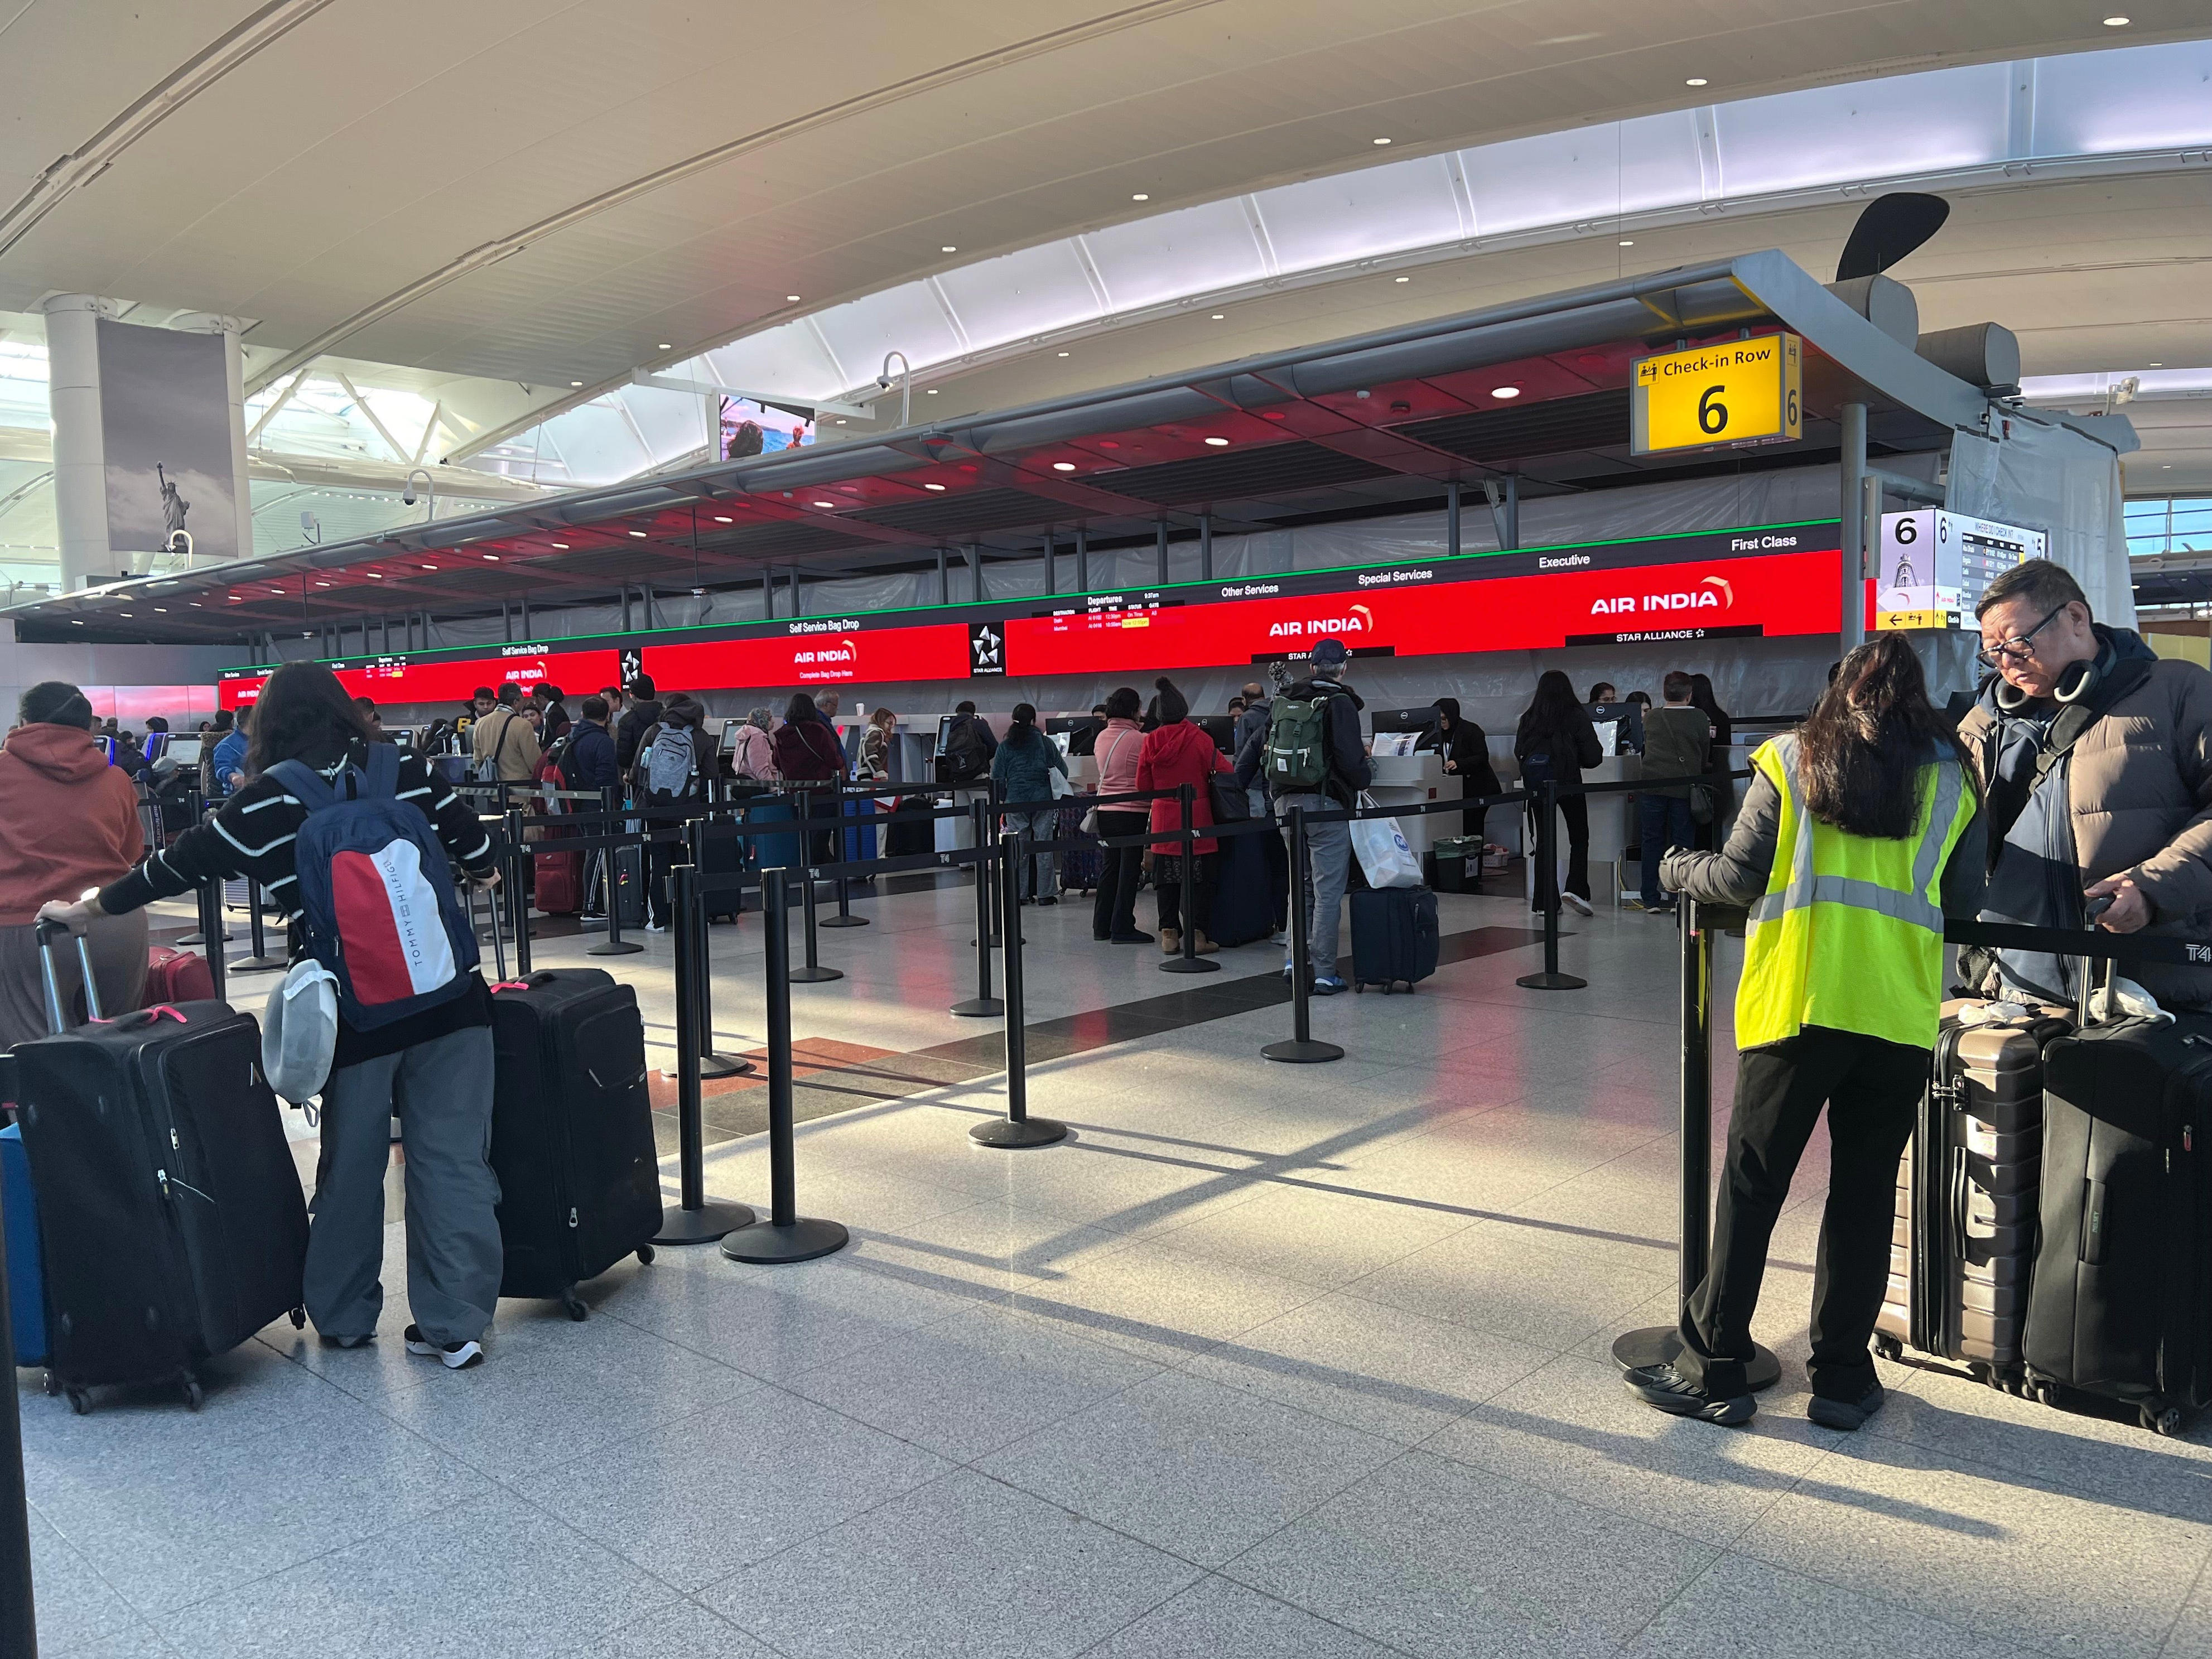 <p>The display lining along the back of the check-in area showed Air India's new logo and color scheme and flight information for routes to Delhi and Mumbai.</p>